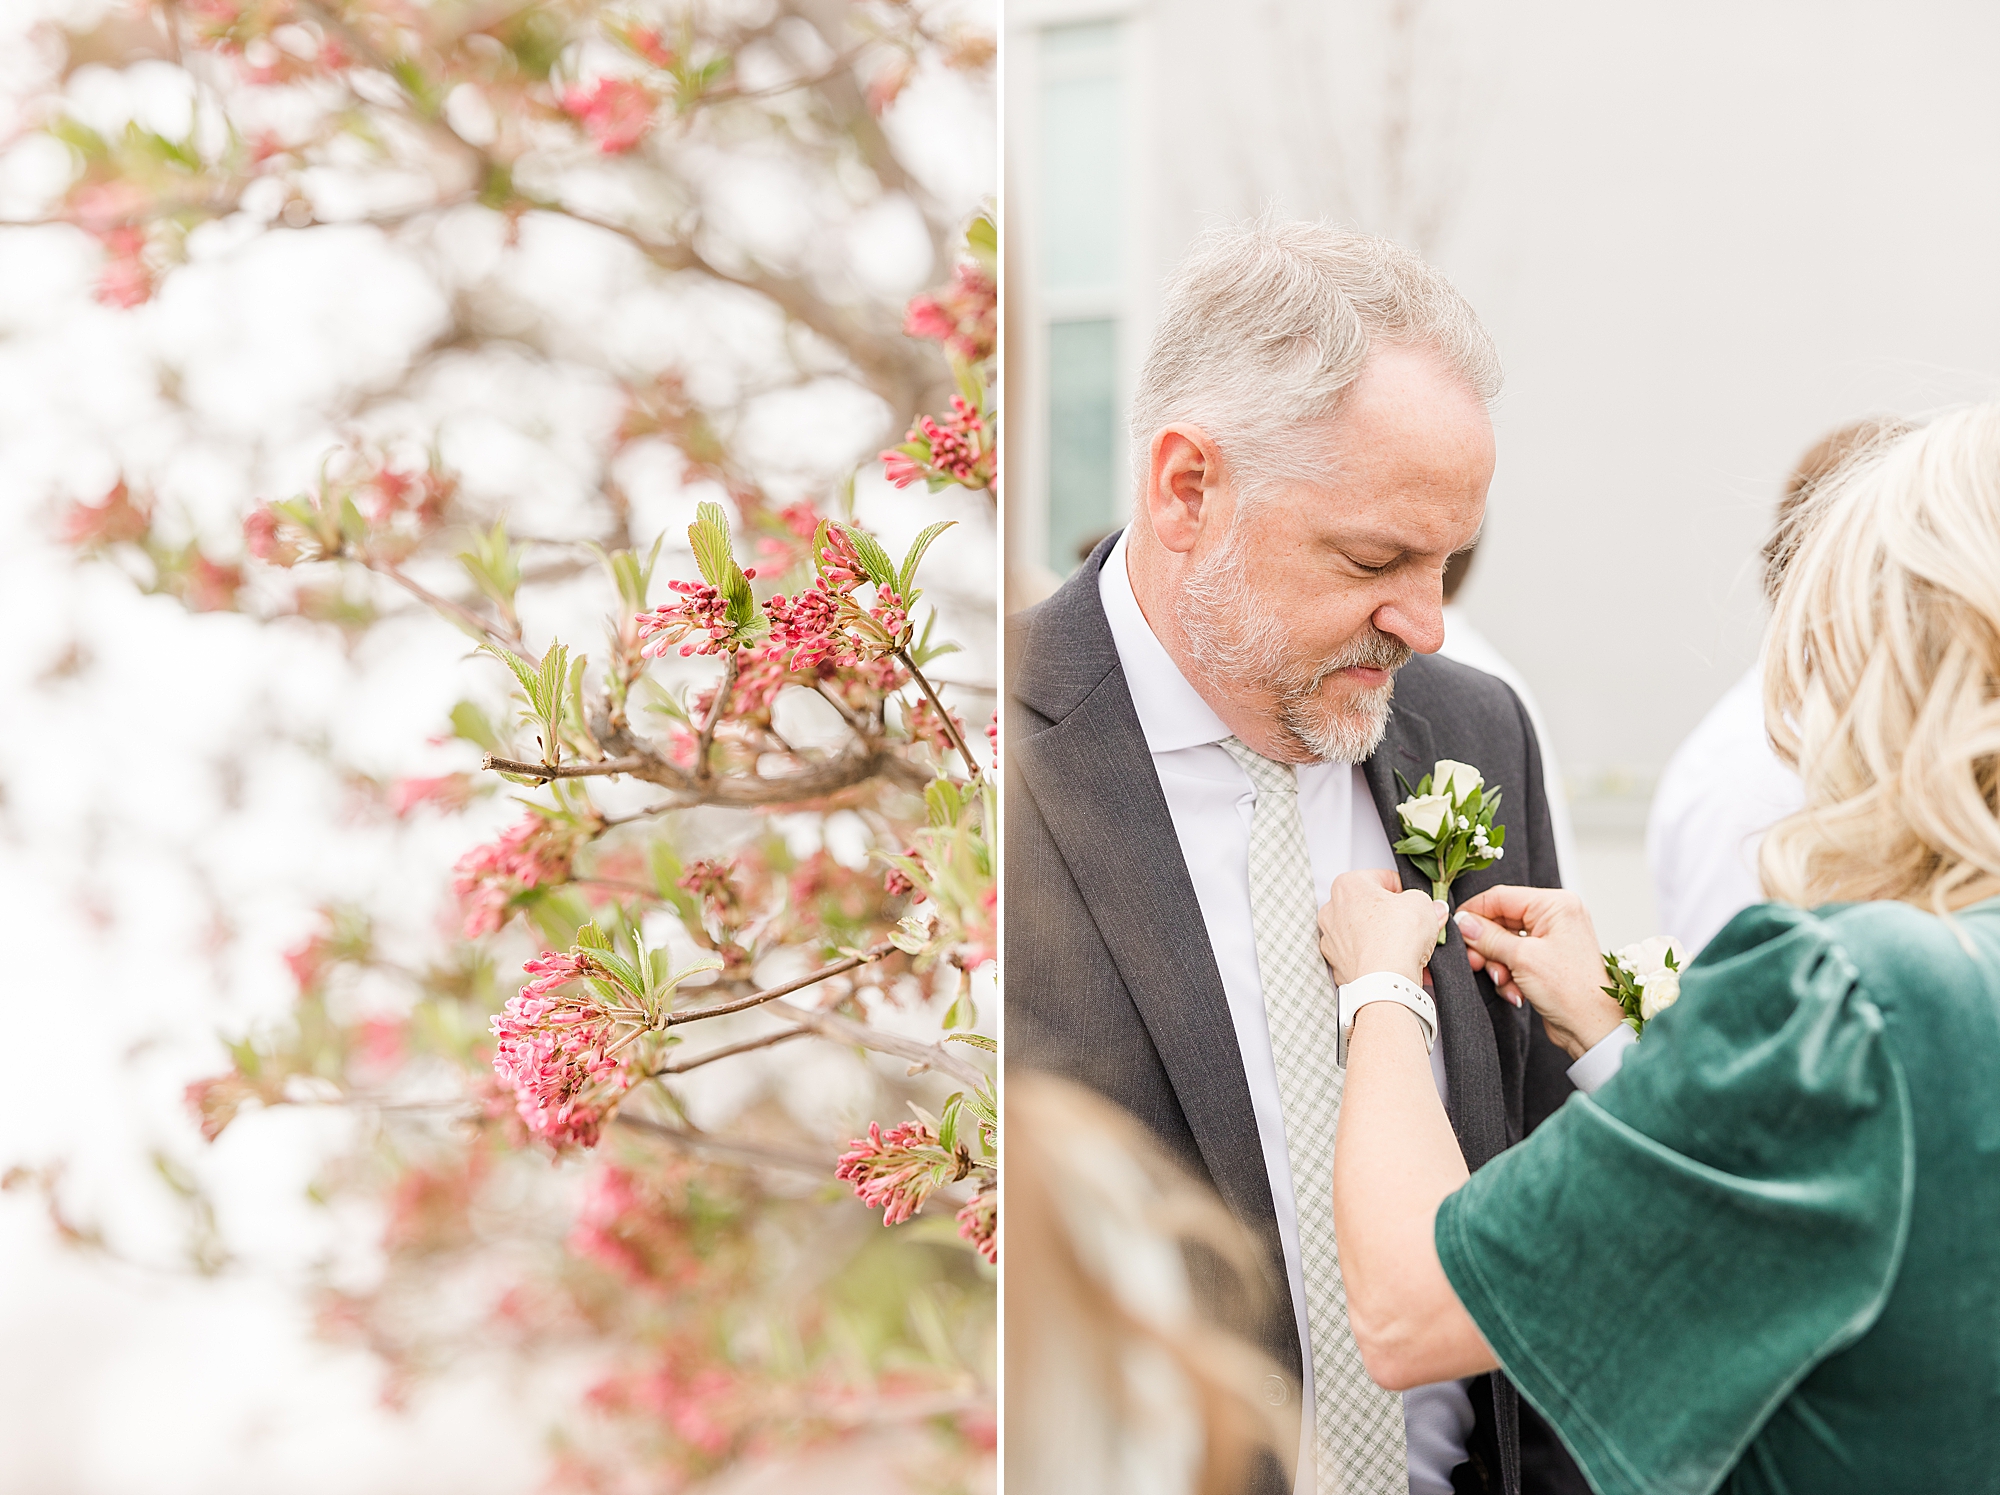 Father of the bride getting his boutonniere on